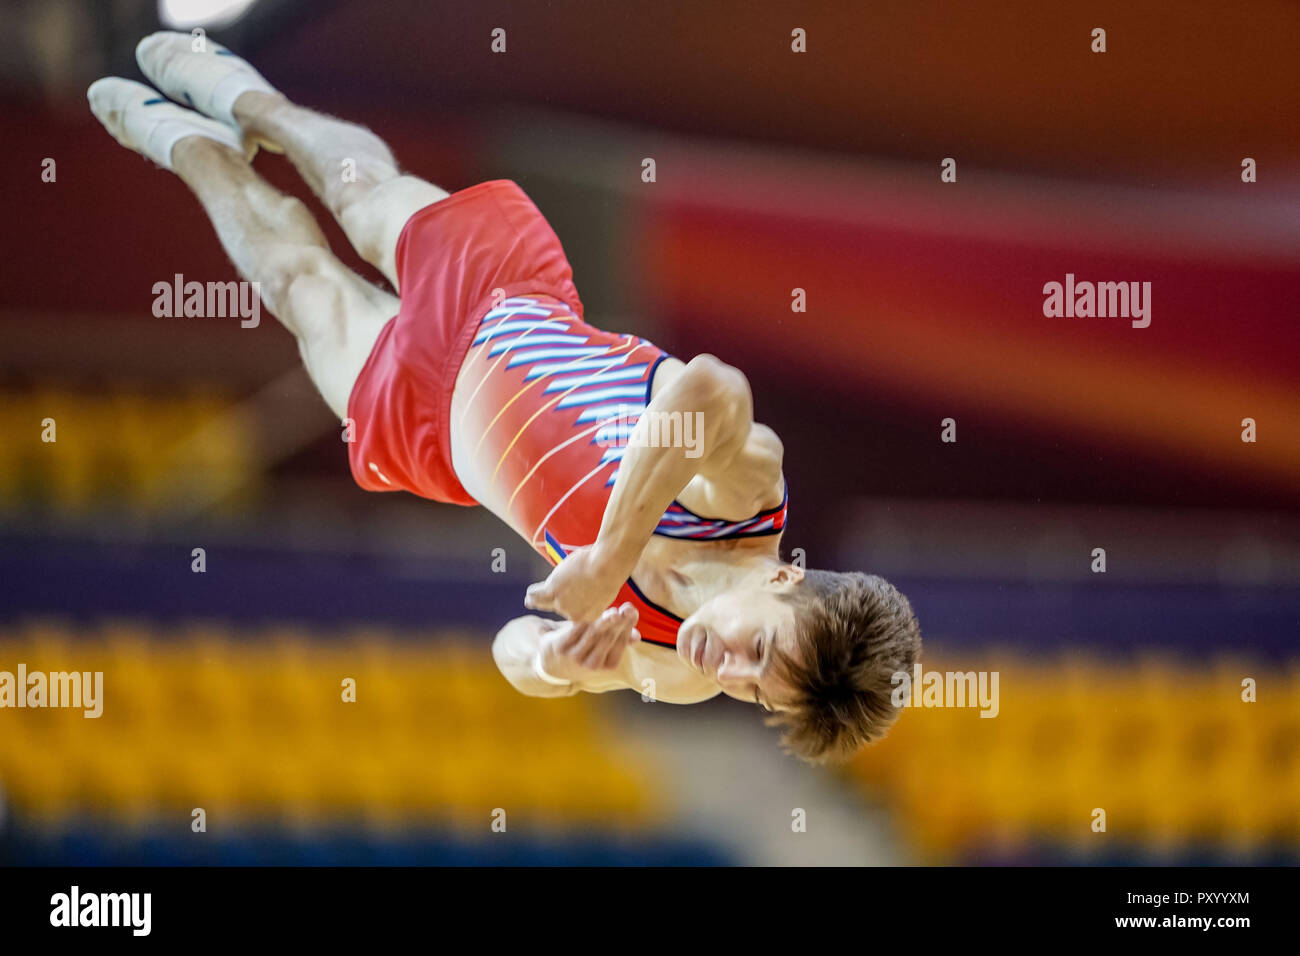 October 25, 2018: Rafael Szabo of Â Romania during floor qualification at the Arena Armeec in Sofia at the 36th FIG Rhythmic Gymnastics World Championships. Ulrik Pedersen/CSM Stock Photo